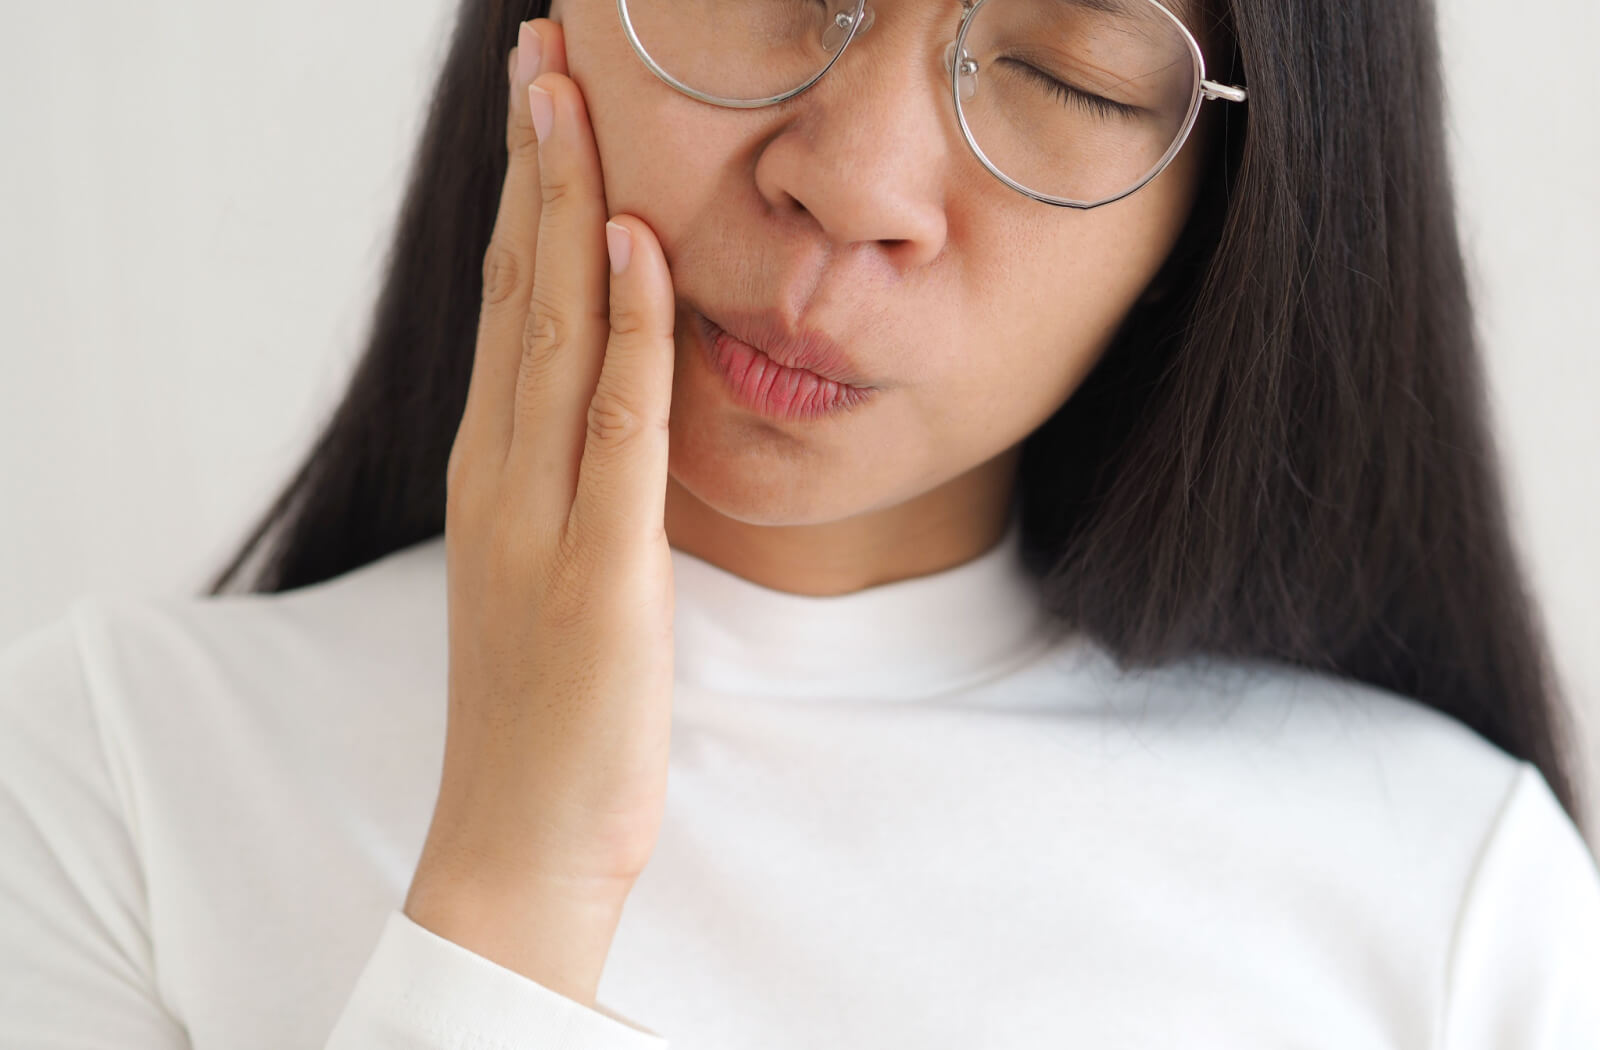 A lady in a white longsleeve with her eye glasses on is holding her right jaw in her right hand with a gesture of pain on her face.